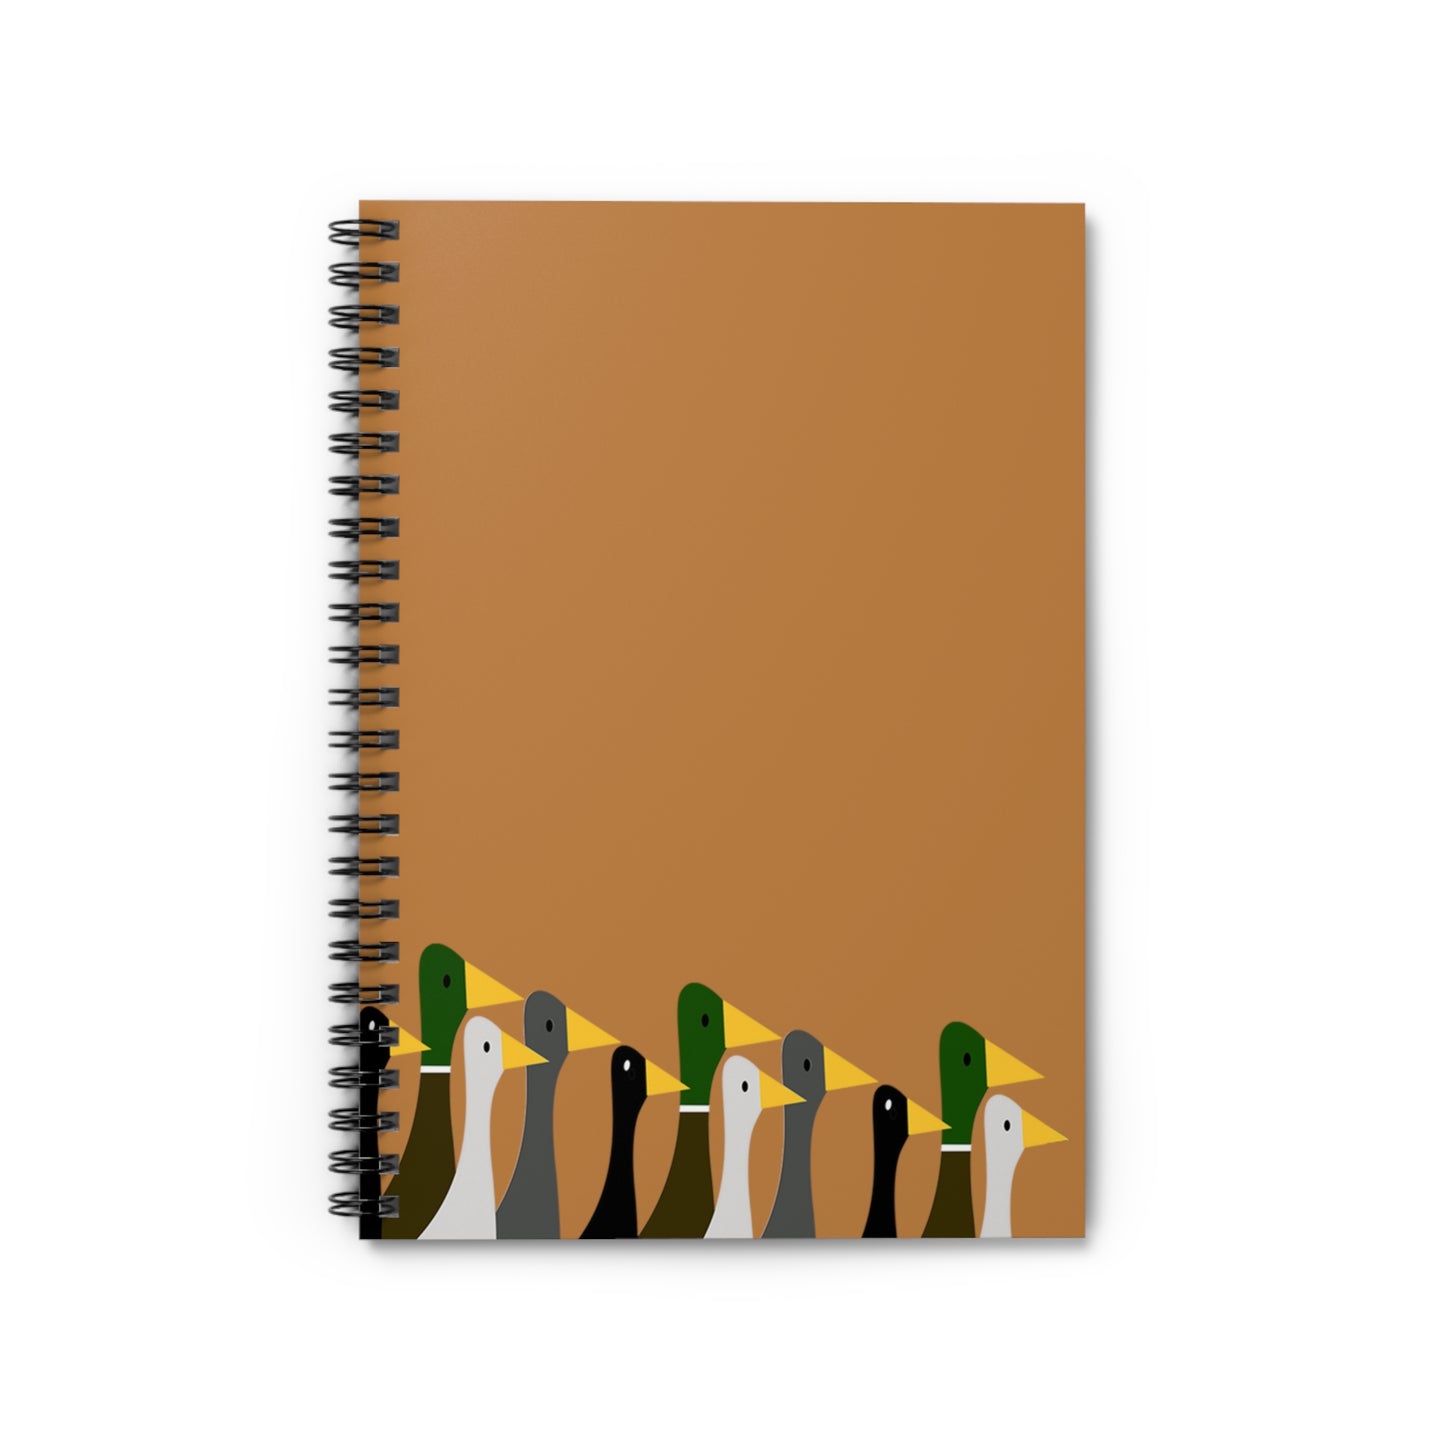 Marching Ducks - Brandy Punch be8042 - Spiral Notebook - Ruled Line